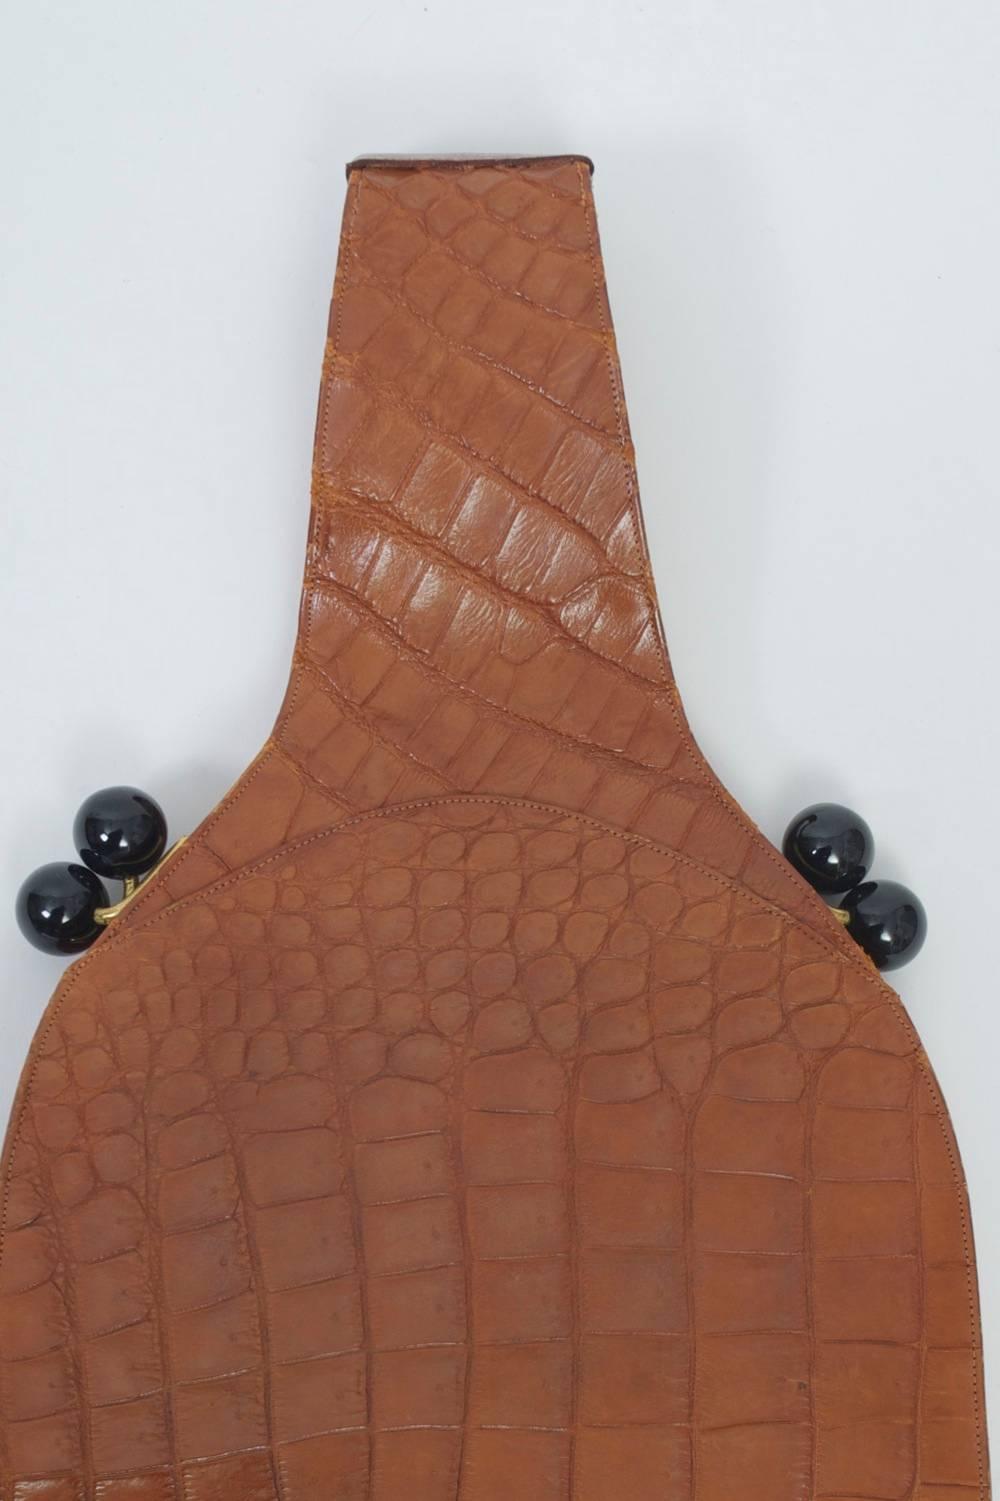 Another great find from Koret, which produced some of the best bags in mid-century America. This example is in tobacco-toned crocodile and has a slim profile, the body tapering to a continuous wrist hold at top. The bag features kiss closures on